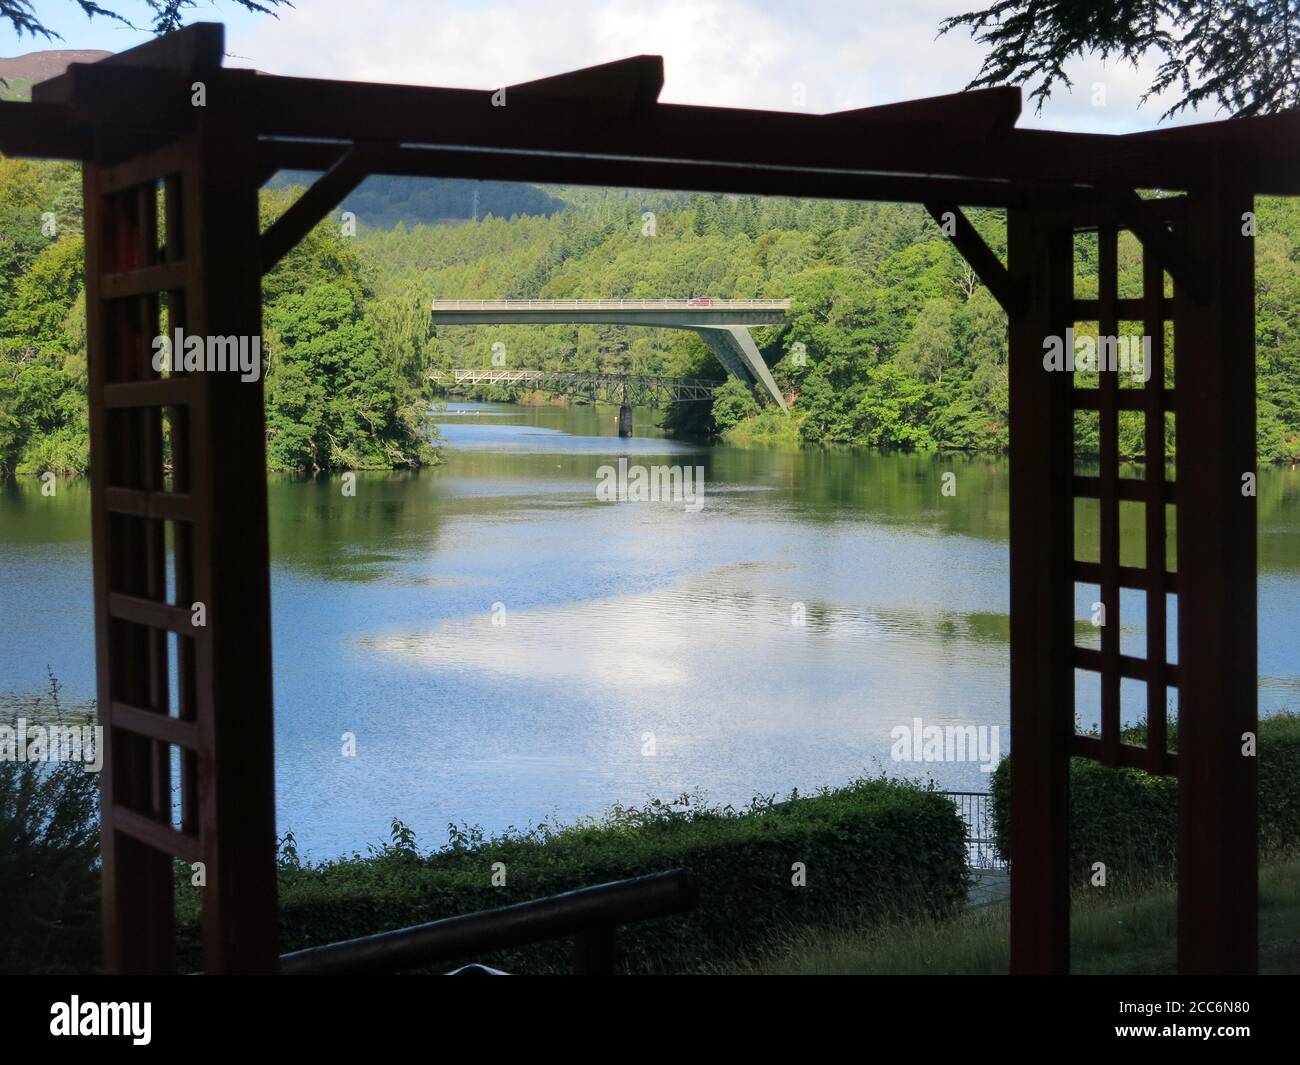 Framed by a latticed pergola, a view overlooking Loch Faskally in Highland Perthshire with the road and pedestrian bridges to Pitlochry. Stock Photo